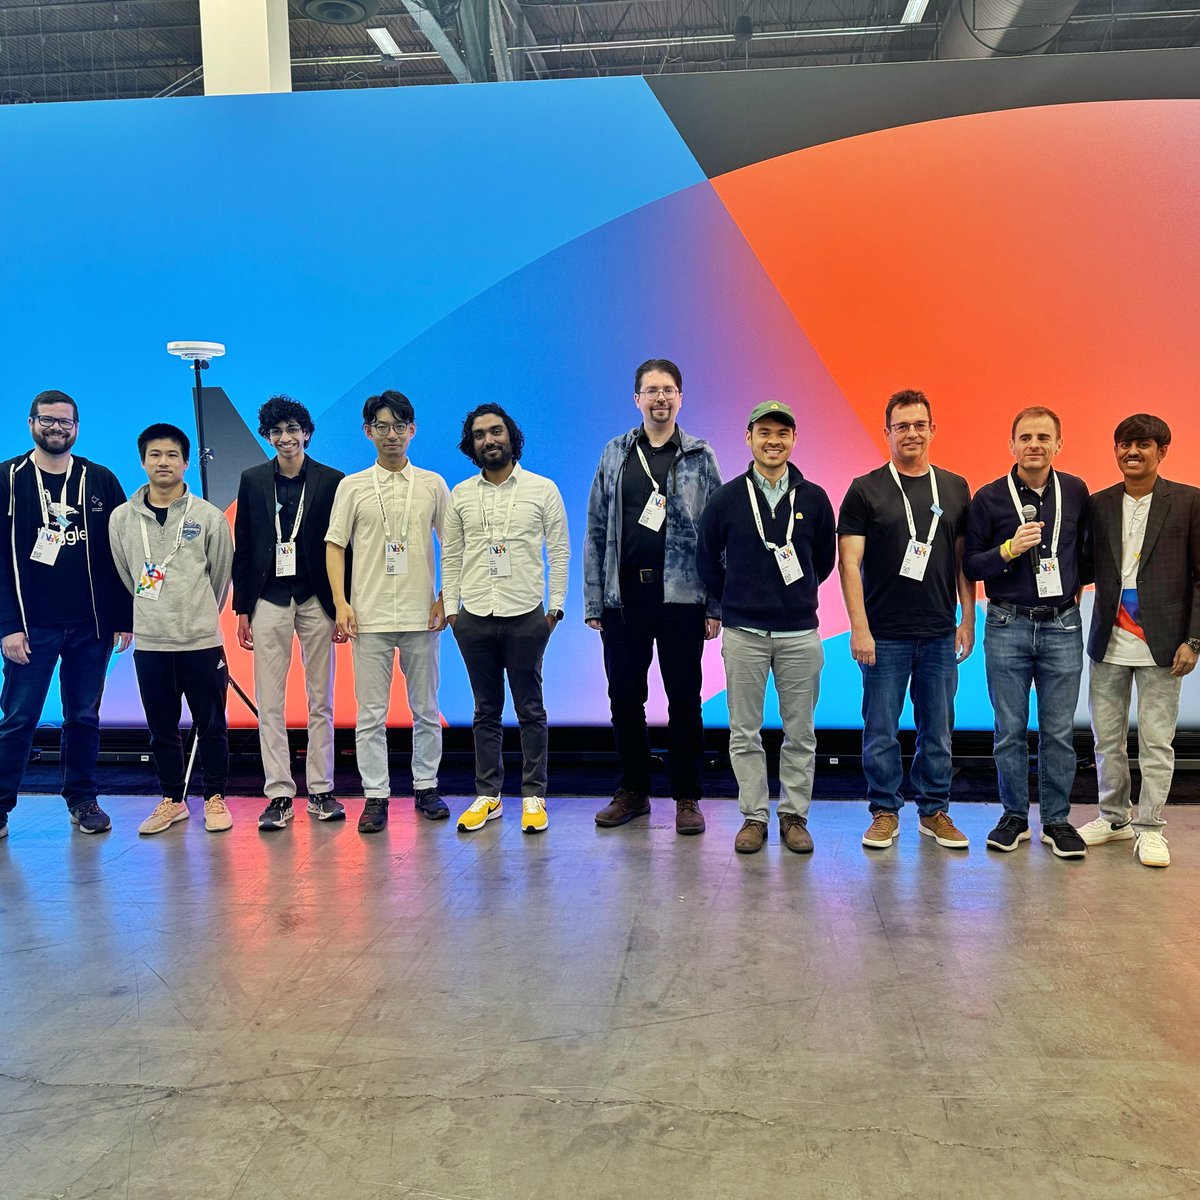 🎉Congratulations to the winners of the in-person NEXT 2024 Hackathon competition at #GoogleCloudNext! 👏 Learn more about the competition here: goo.gle/3TVTBa0